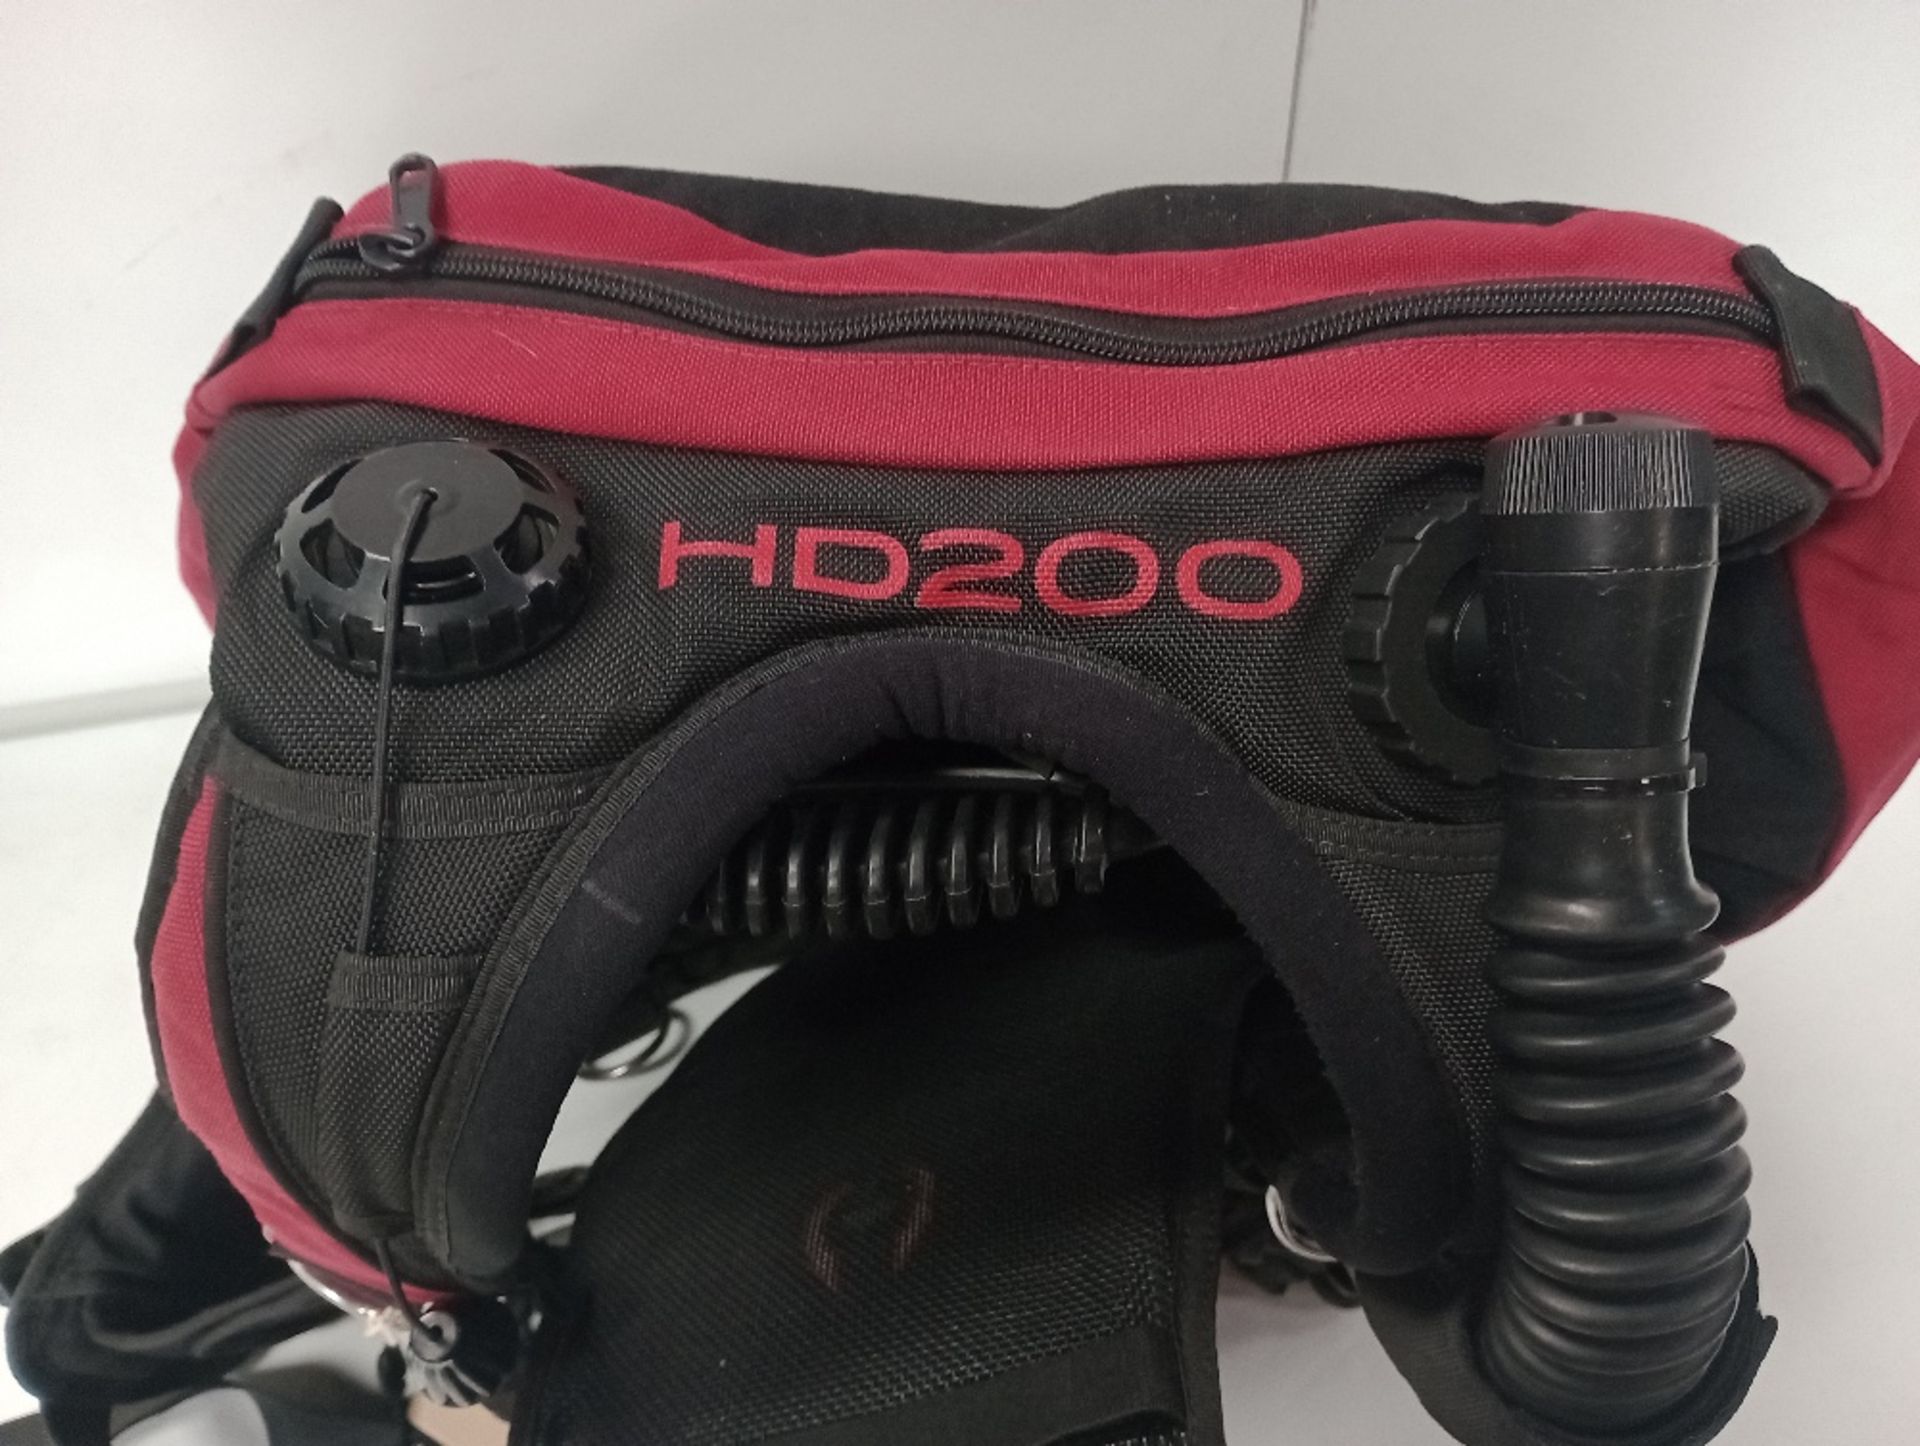 Hollis HD200 Buoyancy Control Device, Size S (Location: Brentwood. Please Refer to General Notes) - Image 4 of 5